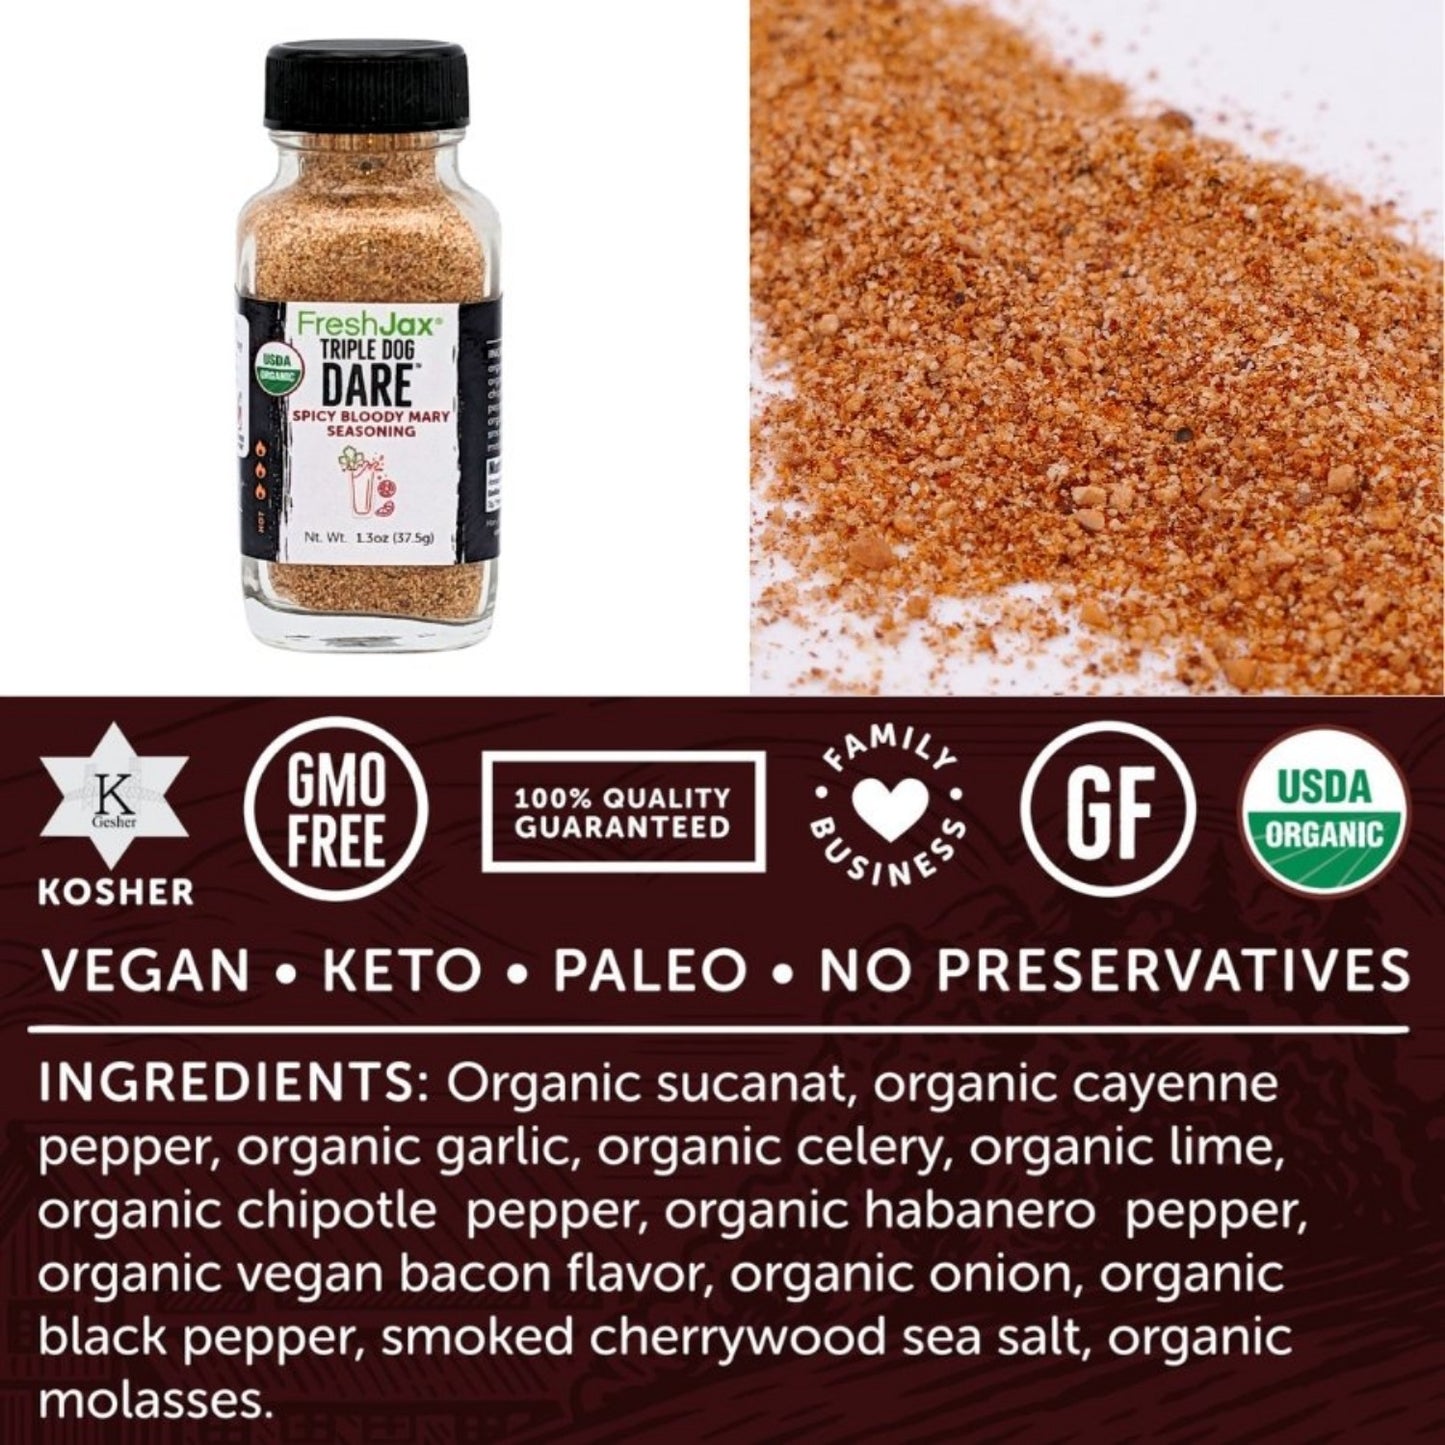 Triple Dog Dare Spicy Bloody Mary Seasoning Ingredients and Nutritional Information